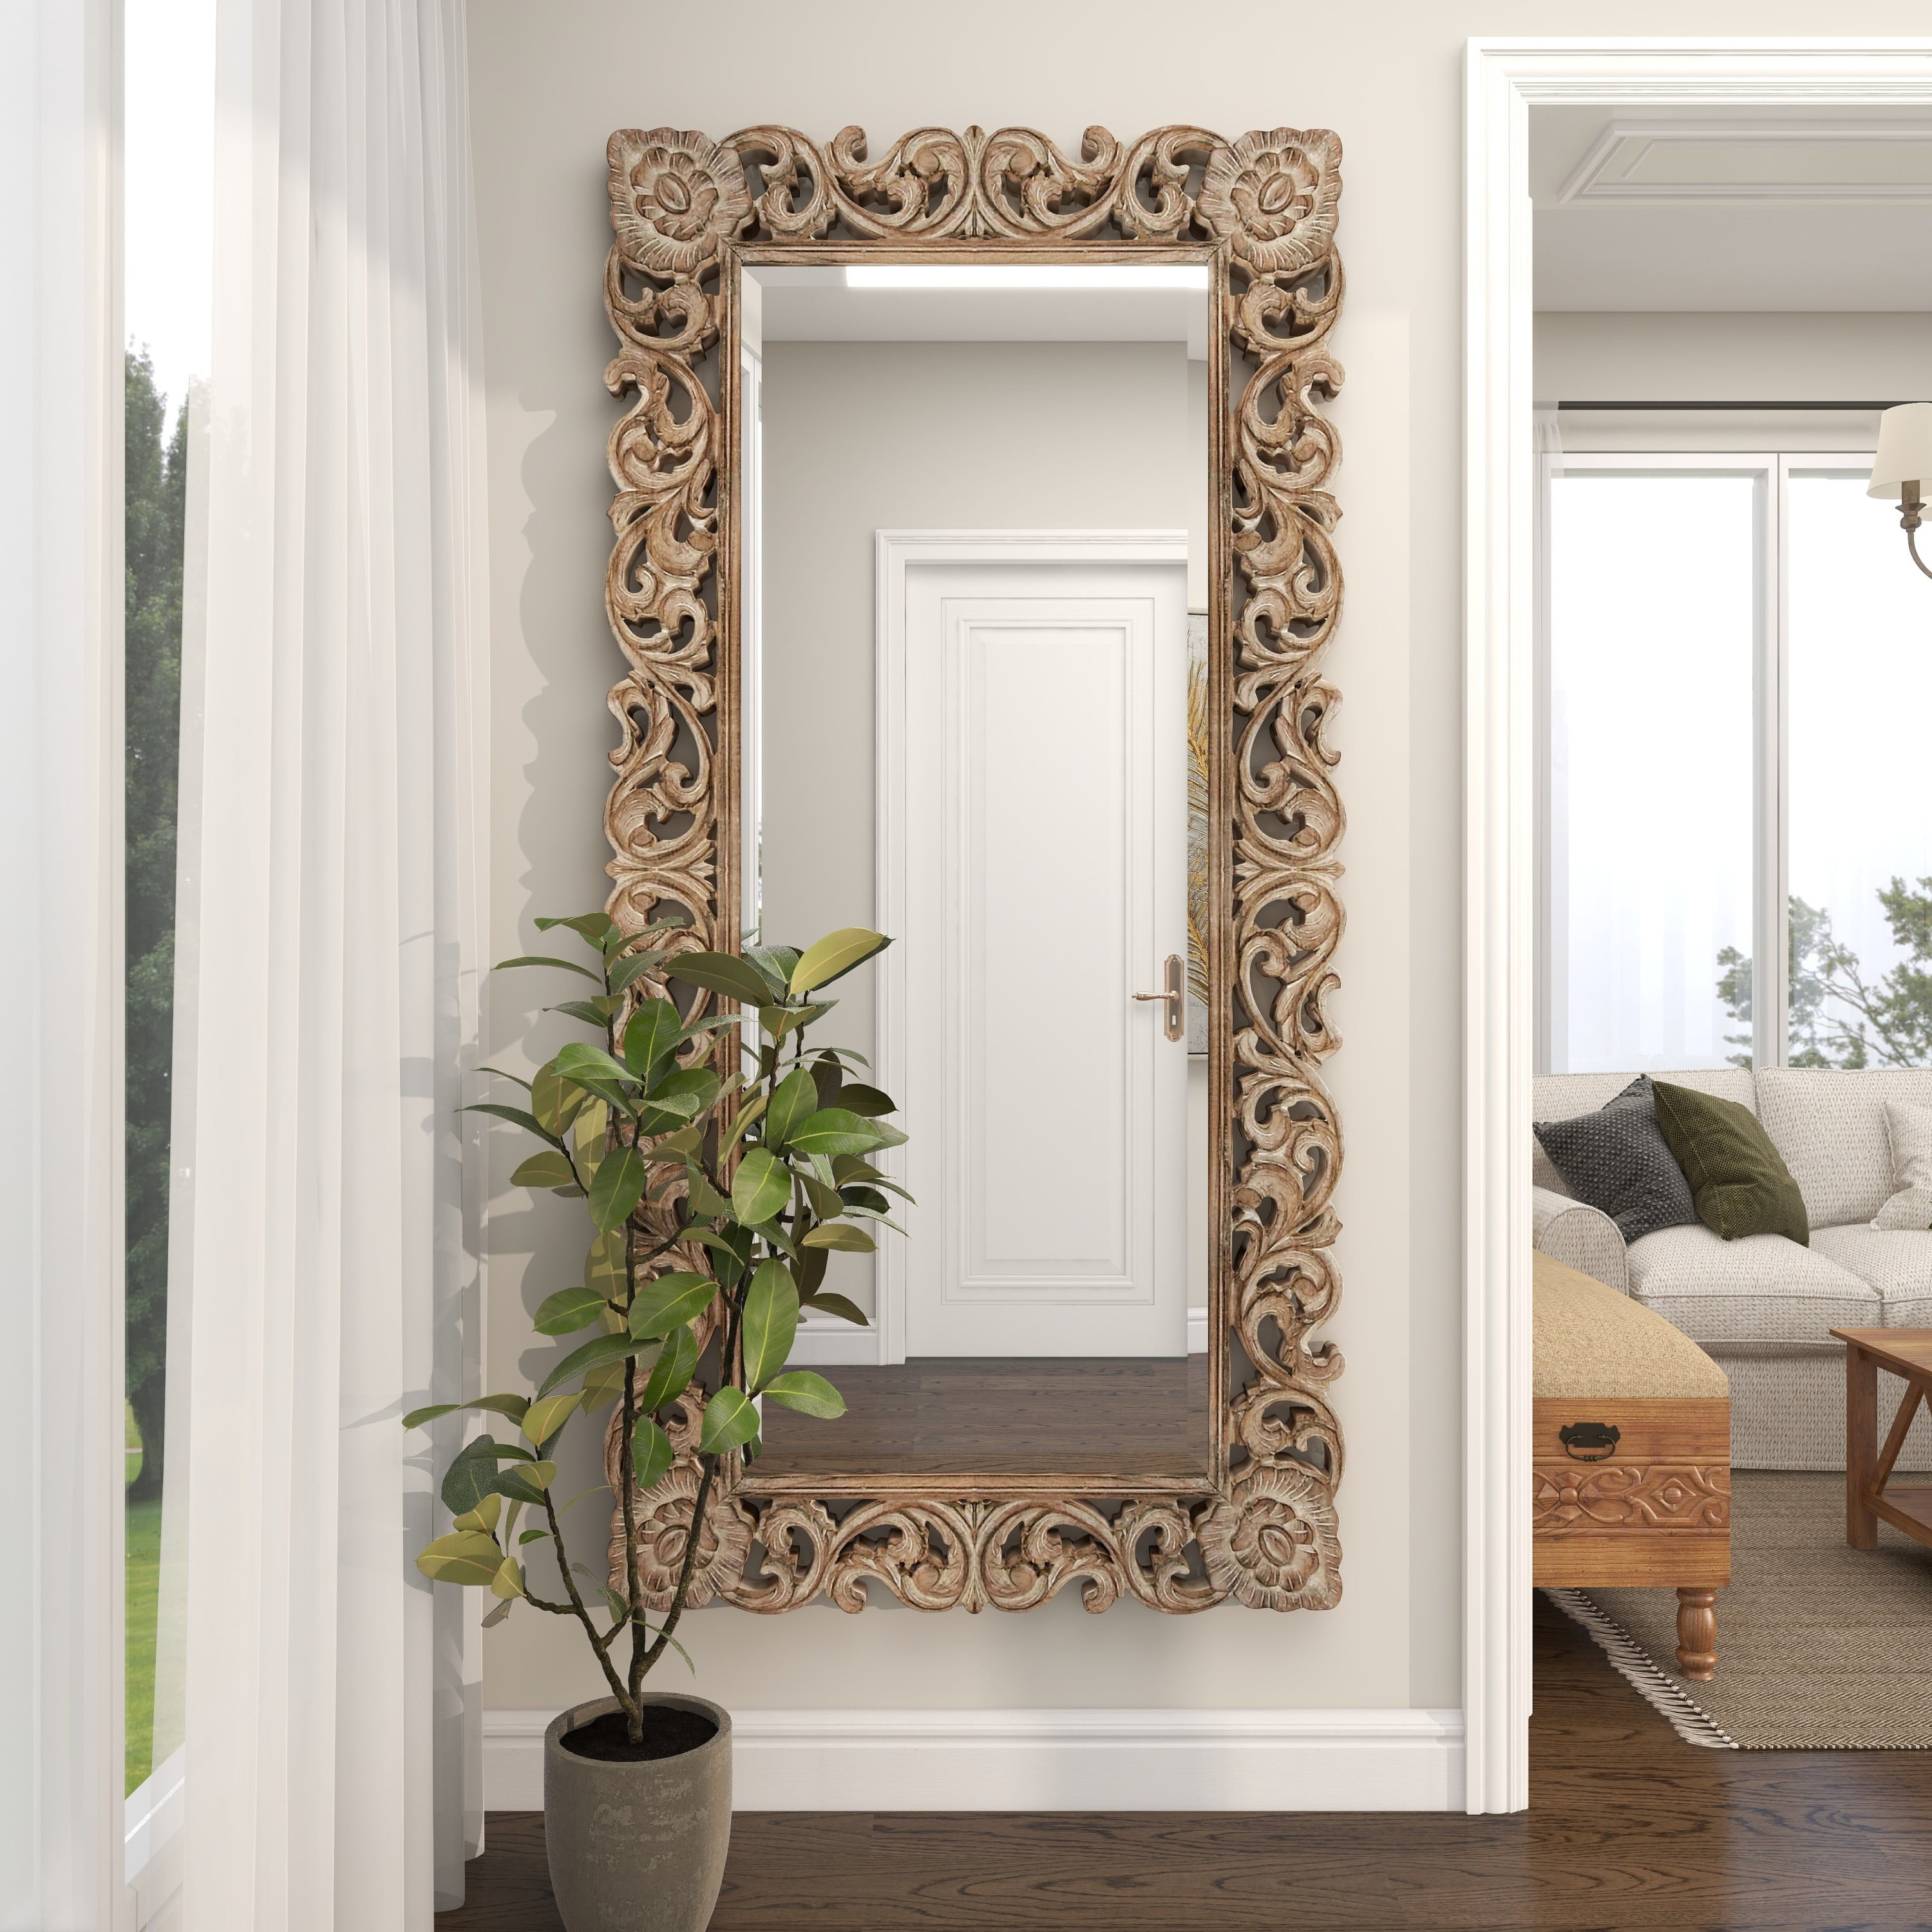 Brown Wood Handmade Intricately Carved Floral Wall Mirror - 36 x 3 x 48 -  On Sale - Bed Bath & Beyond - 32085695